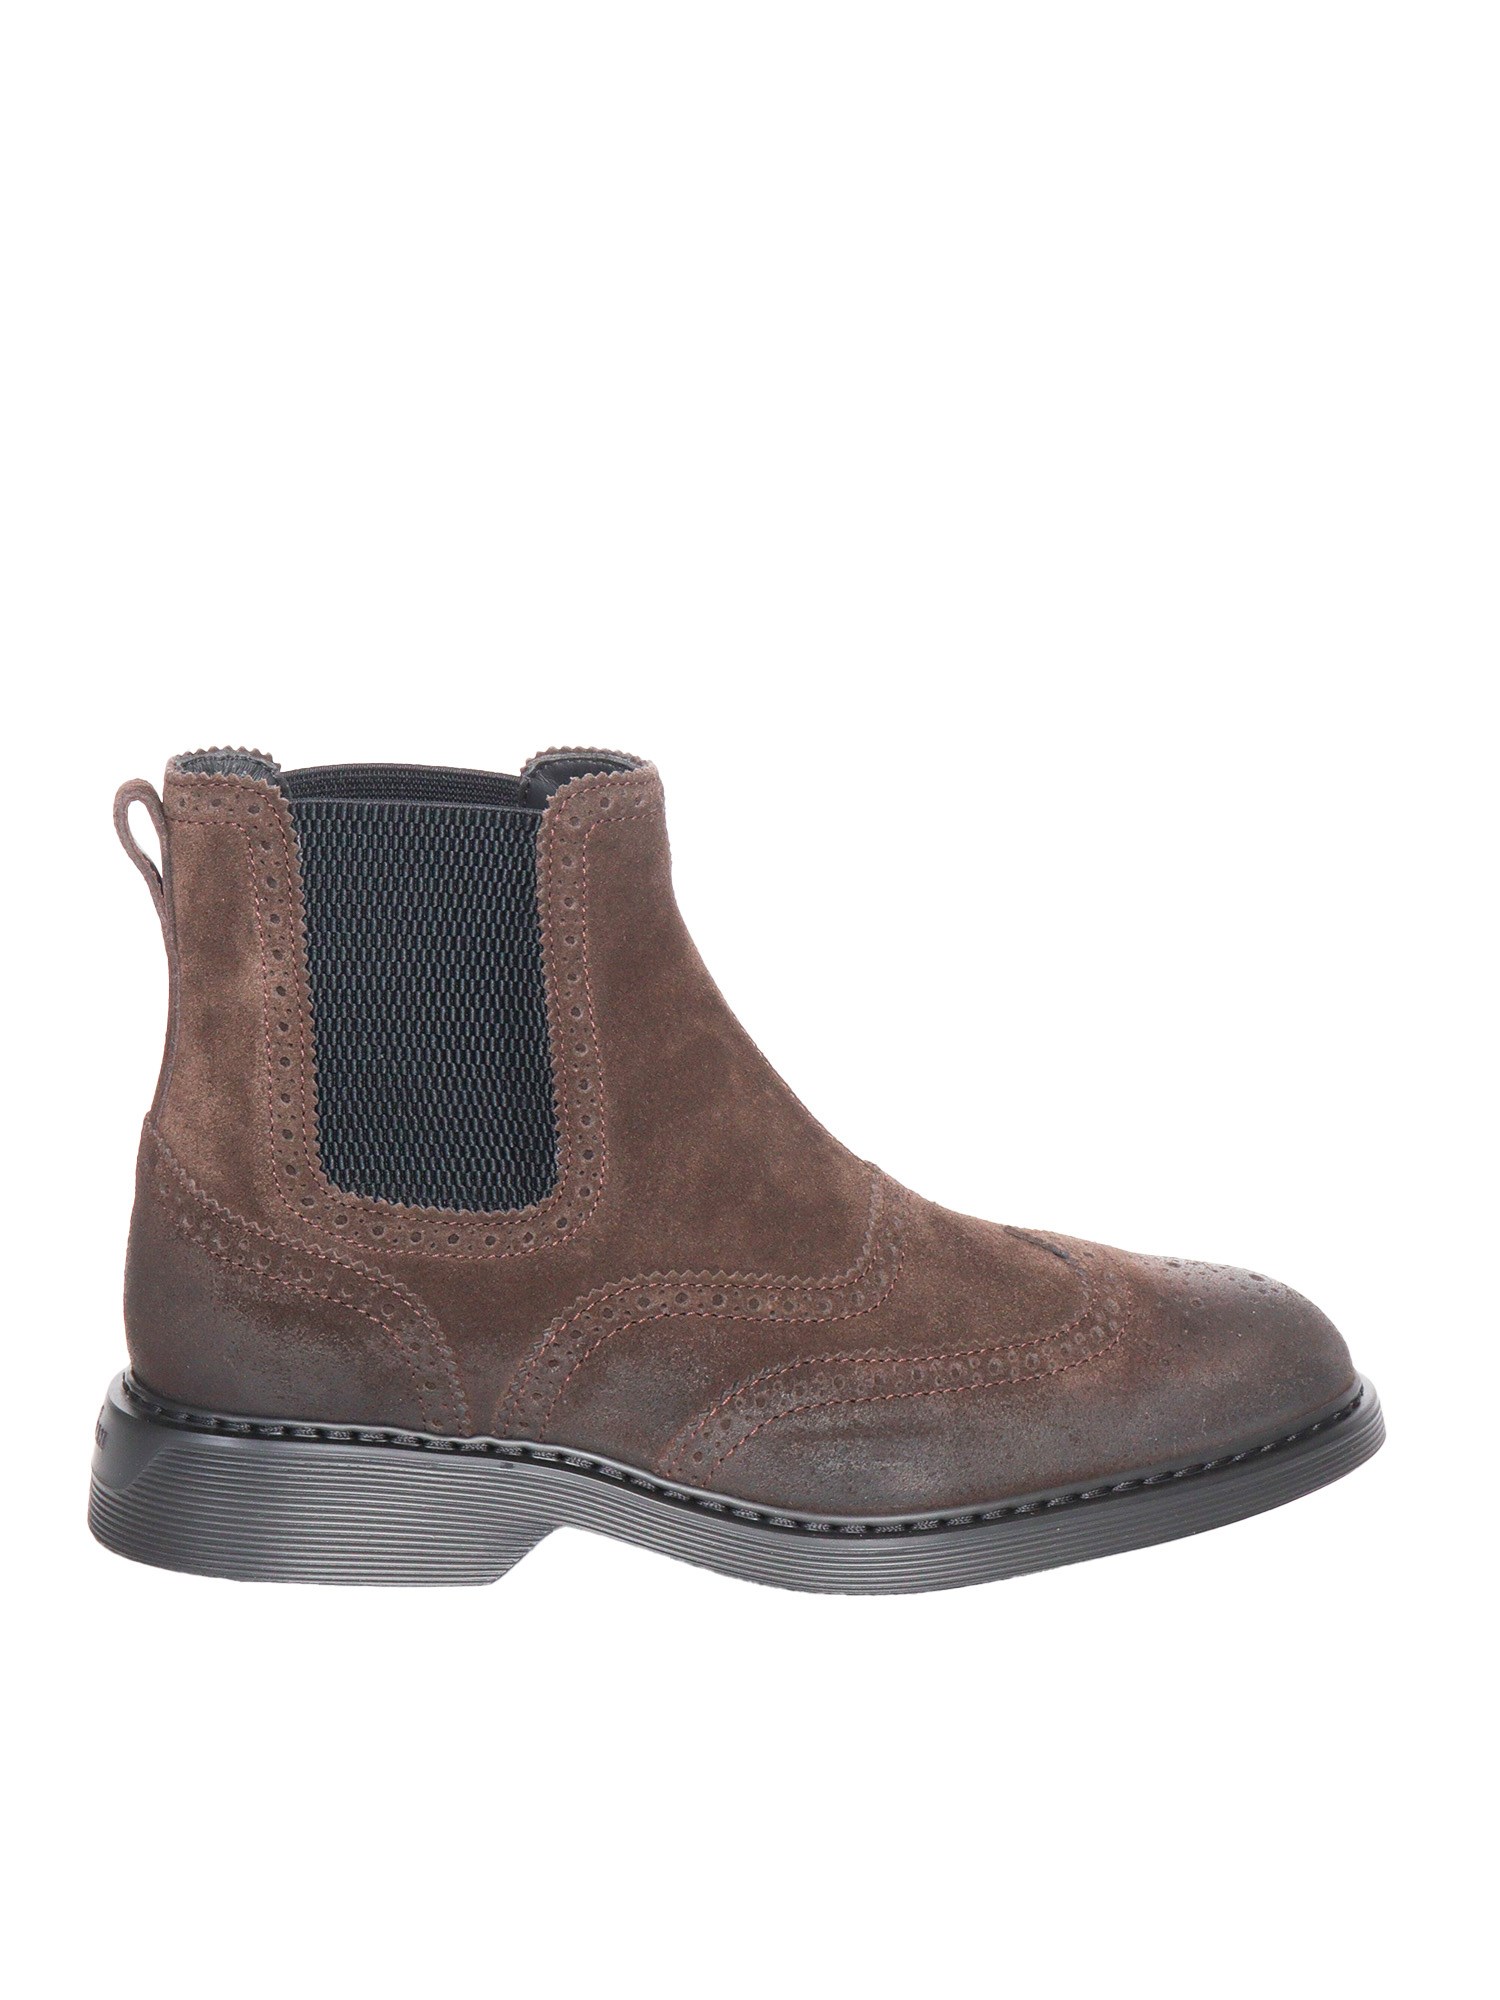 Shop Hogan Chelsea Ankle Boots H576 In Brown